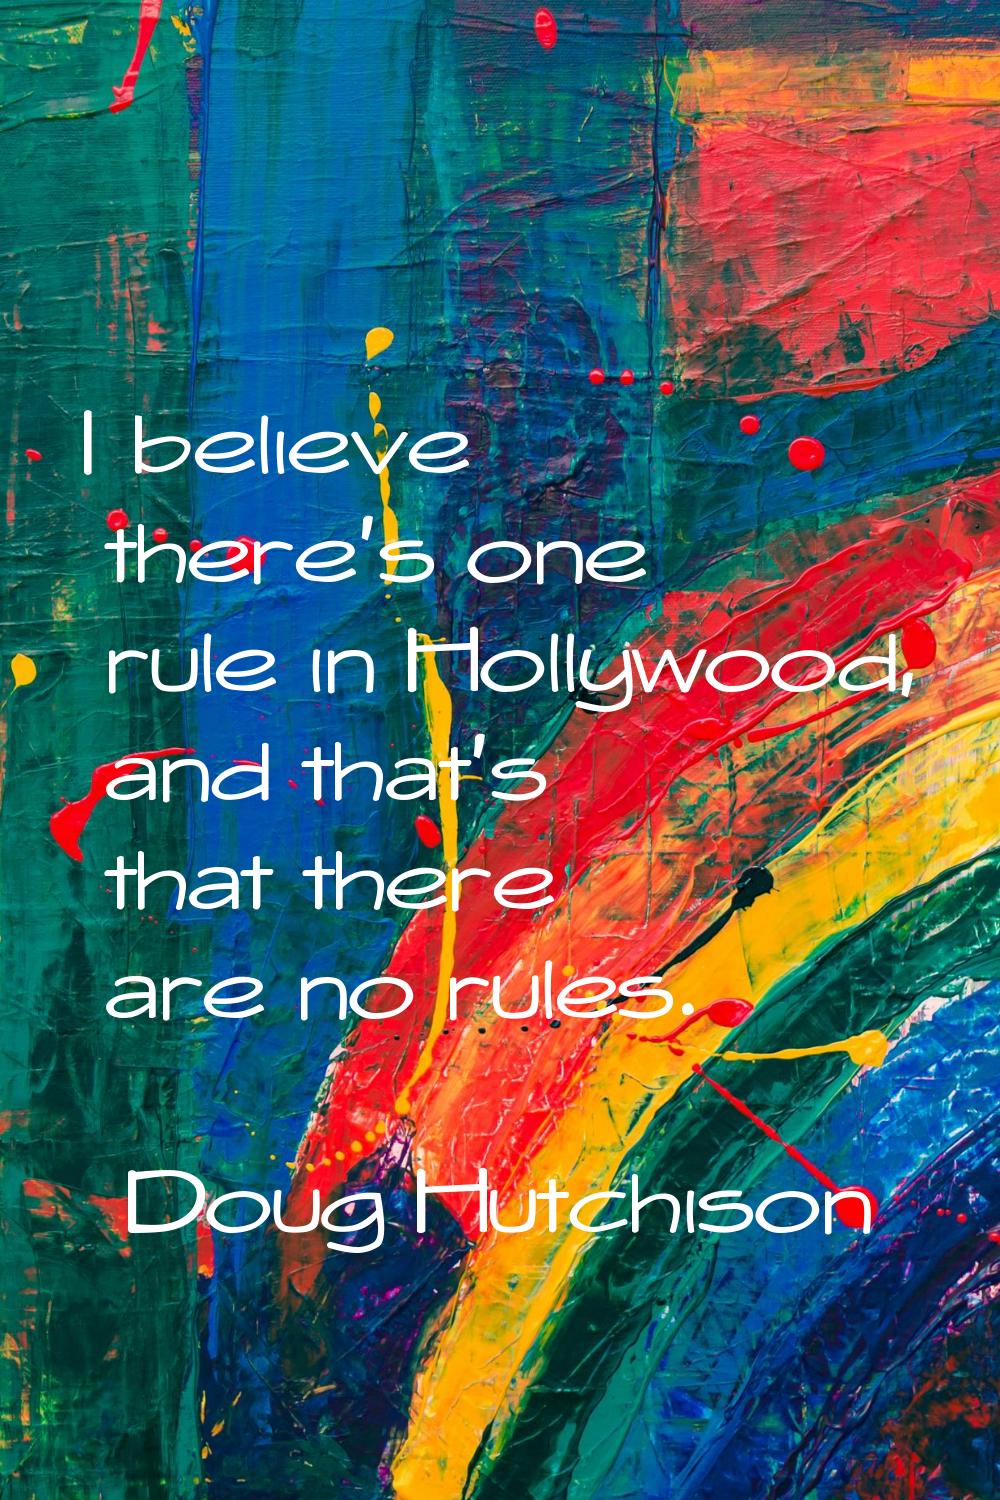 I believe there's one rule in Hollywood, and that's that there are no rules.